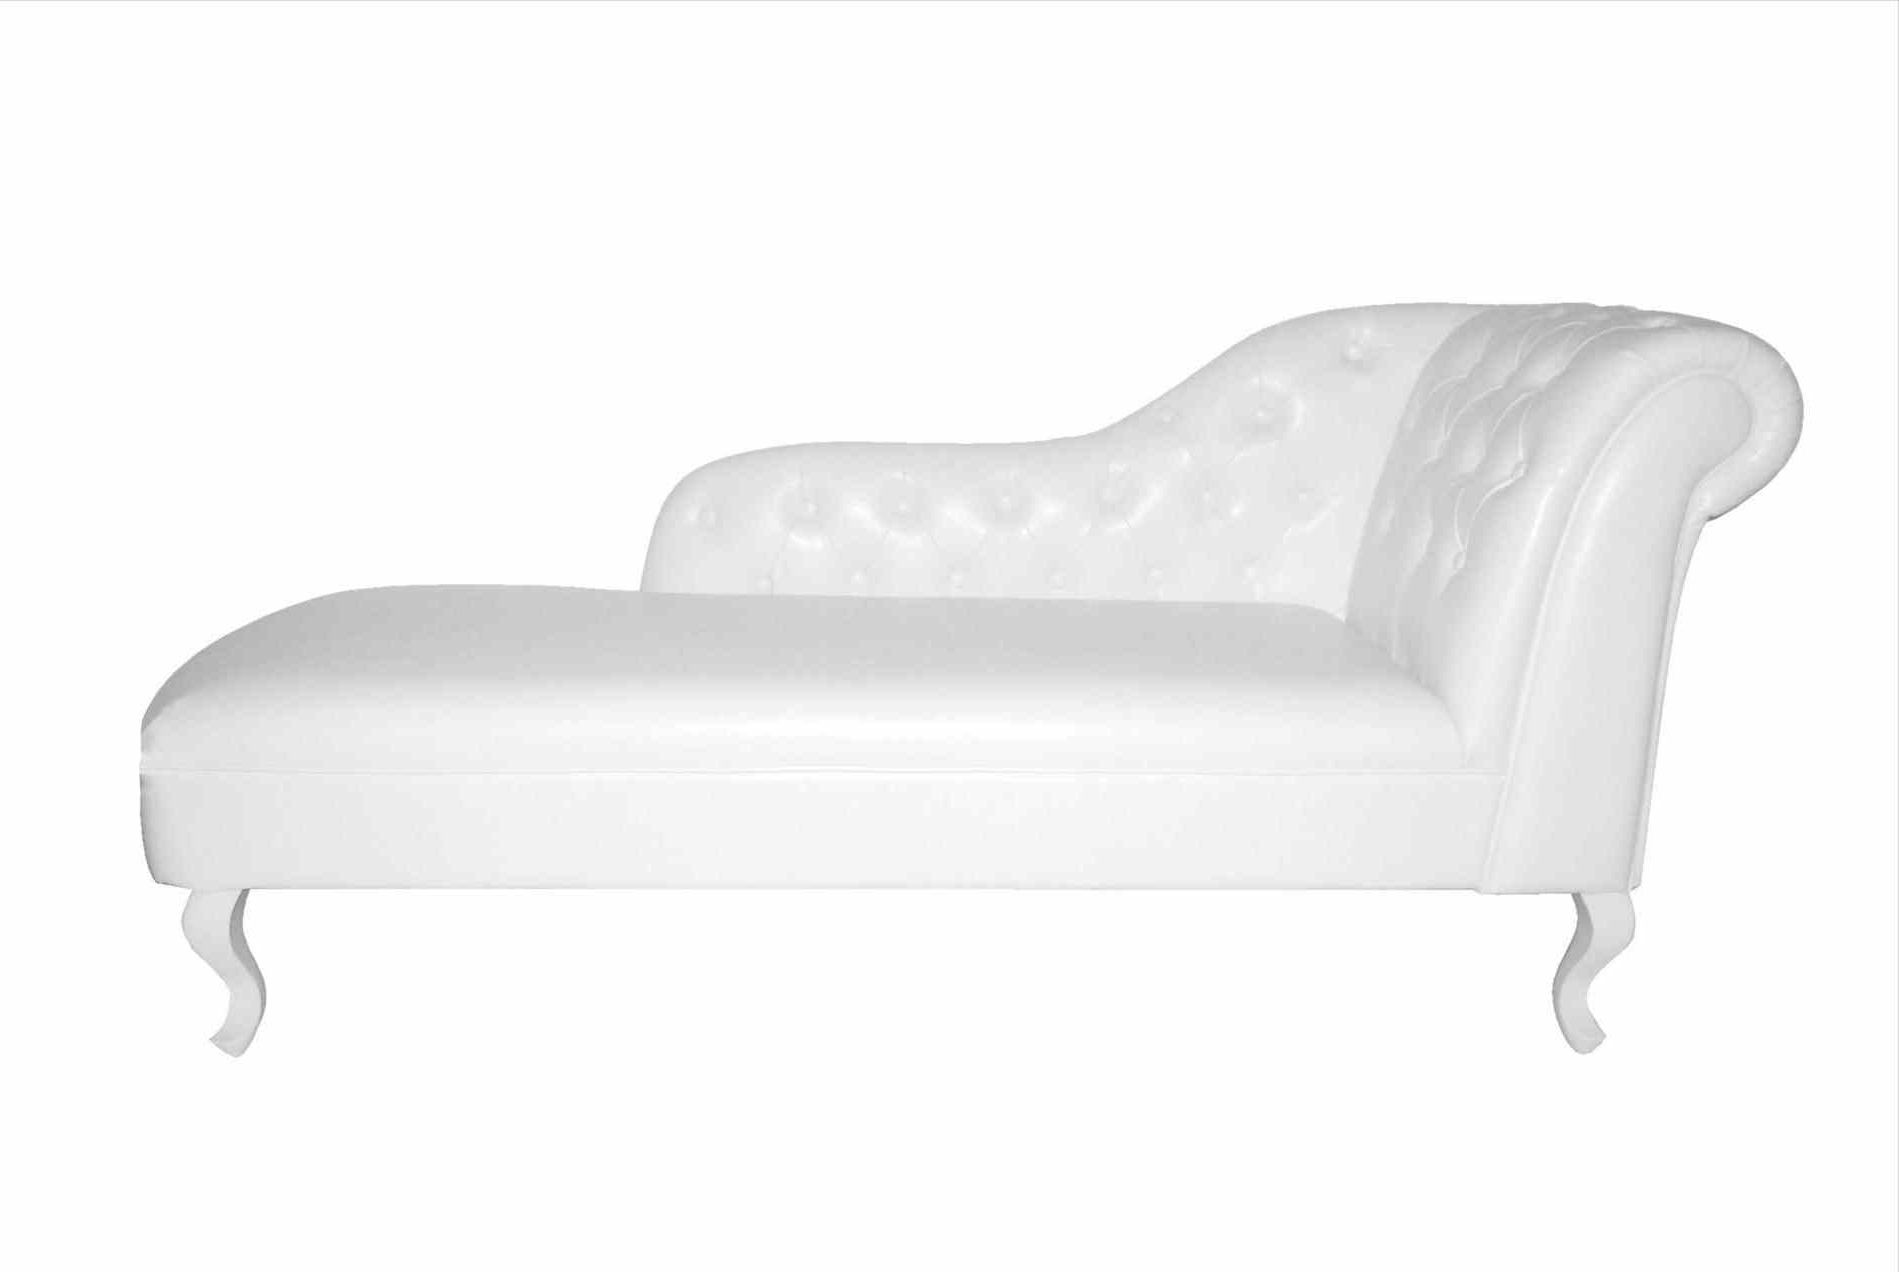 Unique White Chaise Lounge Indoor Opinion – Hello Inside Fashionable White Chaise Lounges (View 9 of 15)